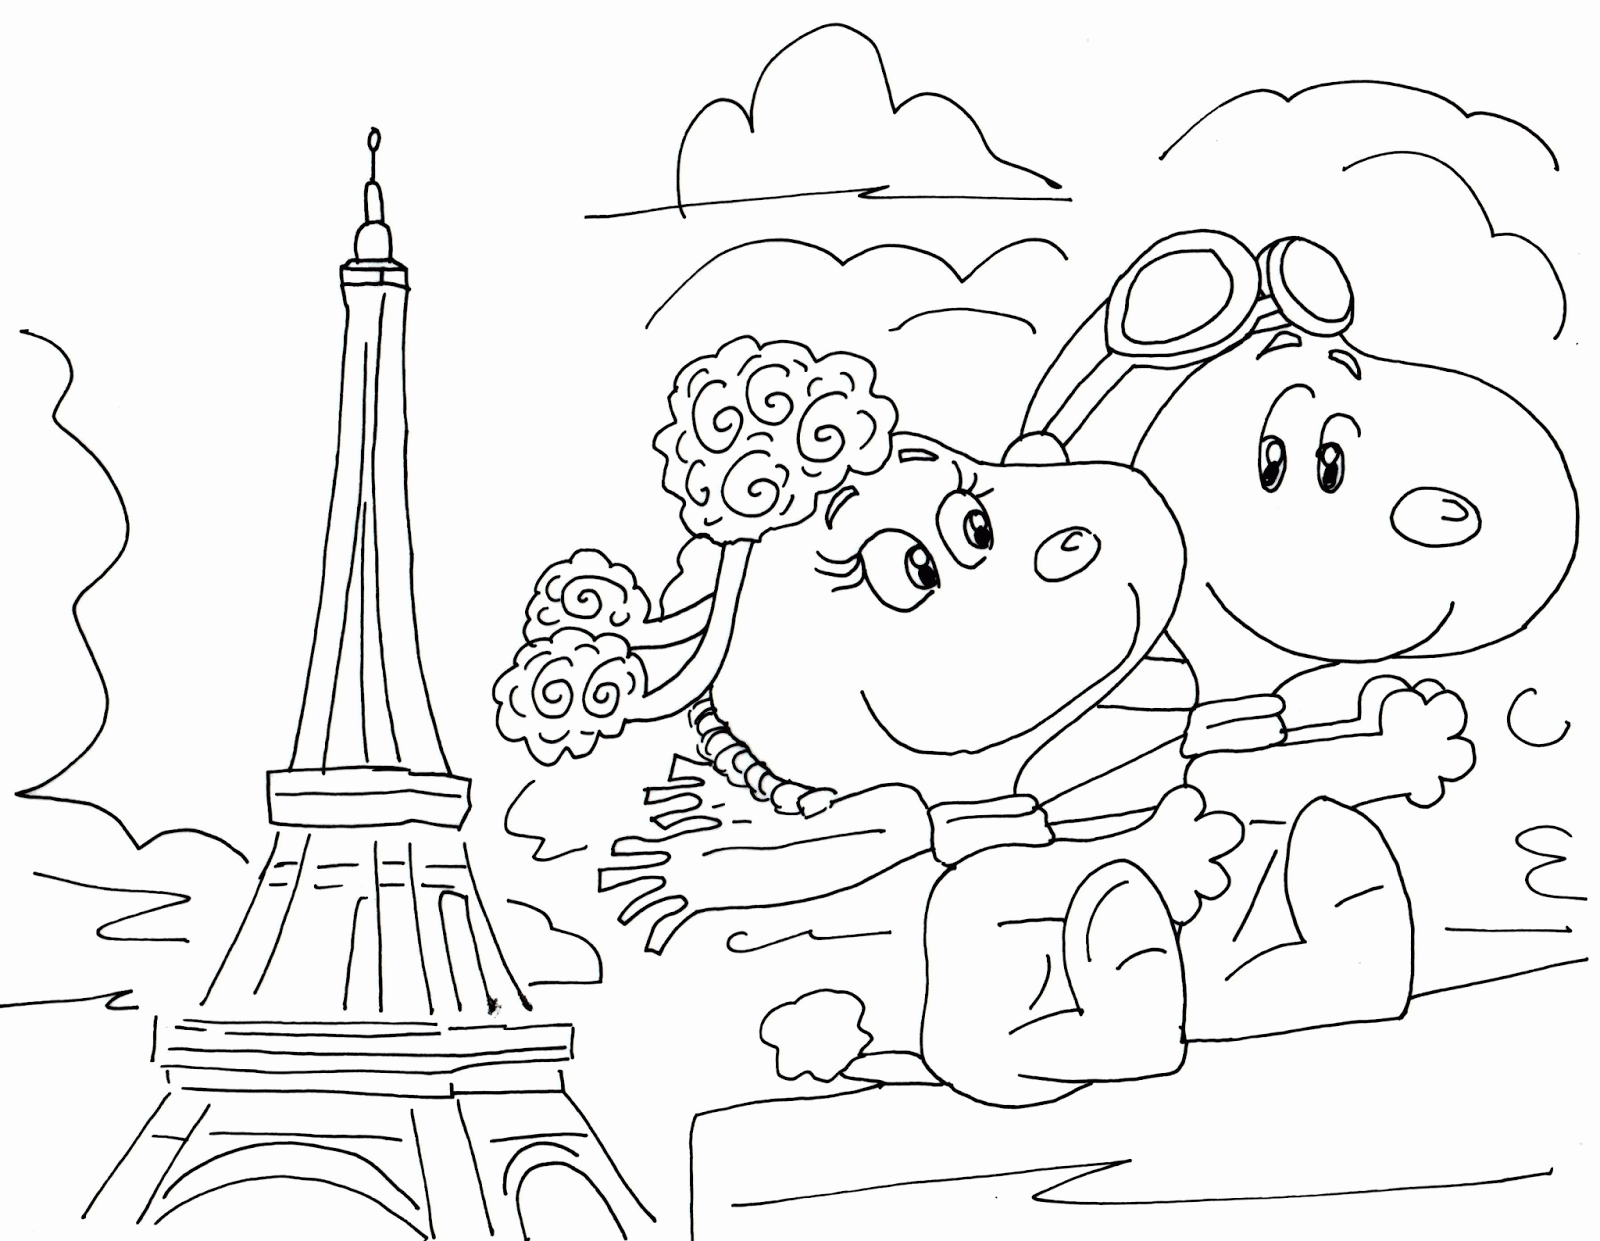 Charlie Brown And Snoopy Peanuts Coloring Page - Coloring Home